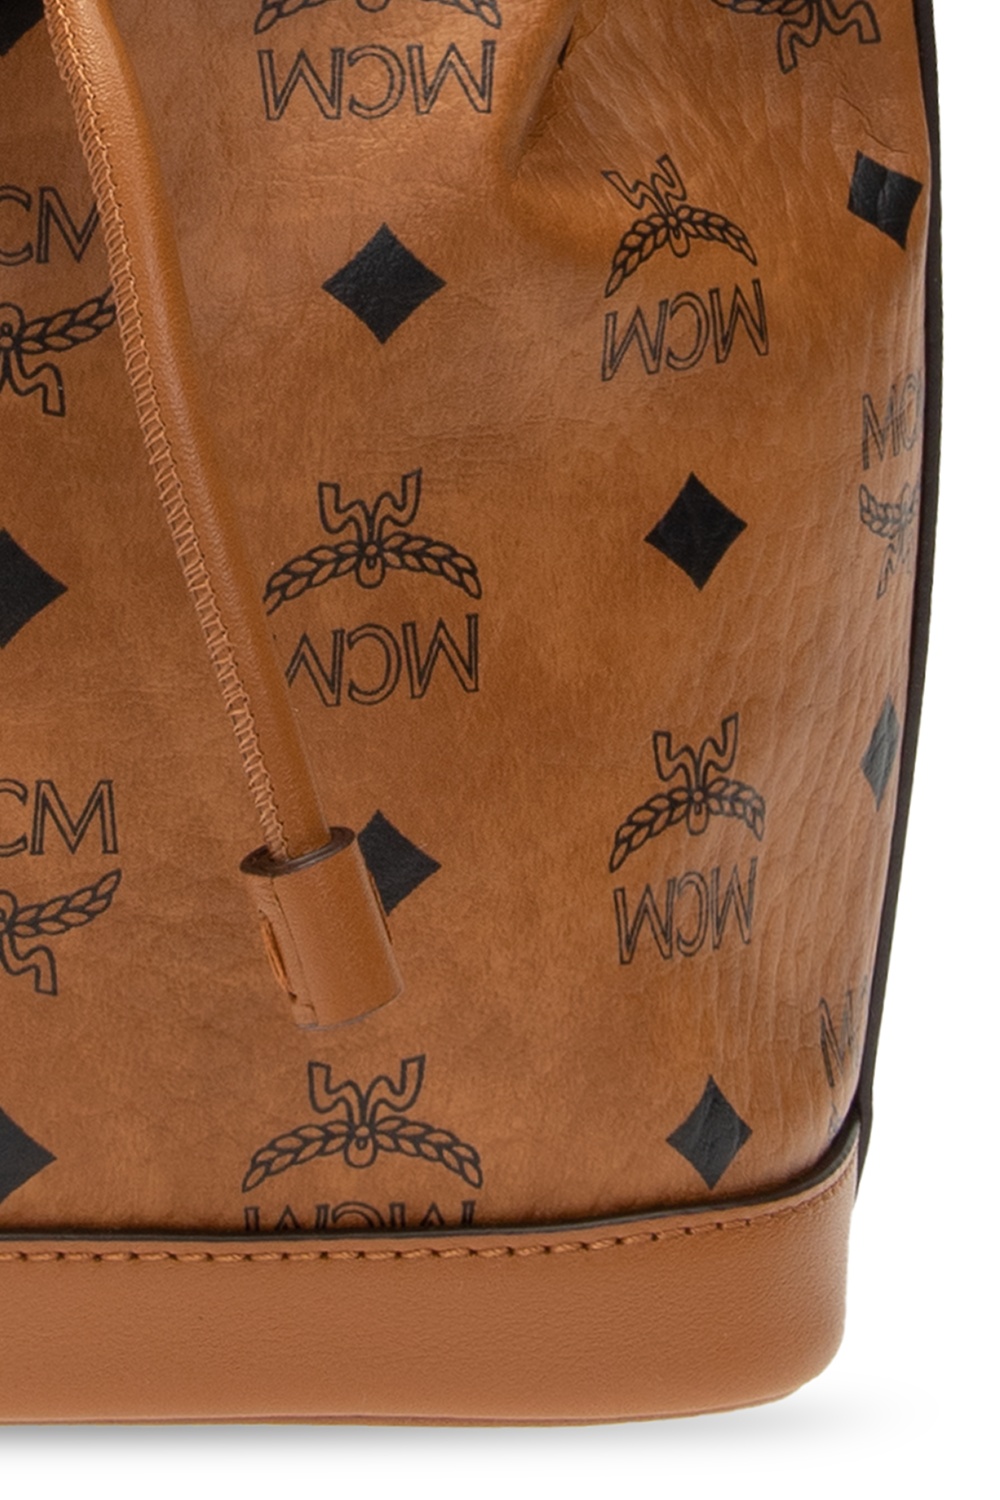 MCM This canvas tote from